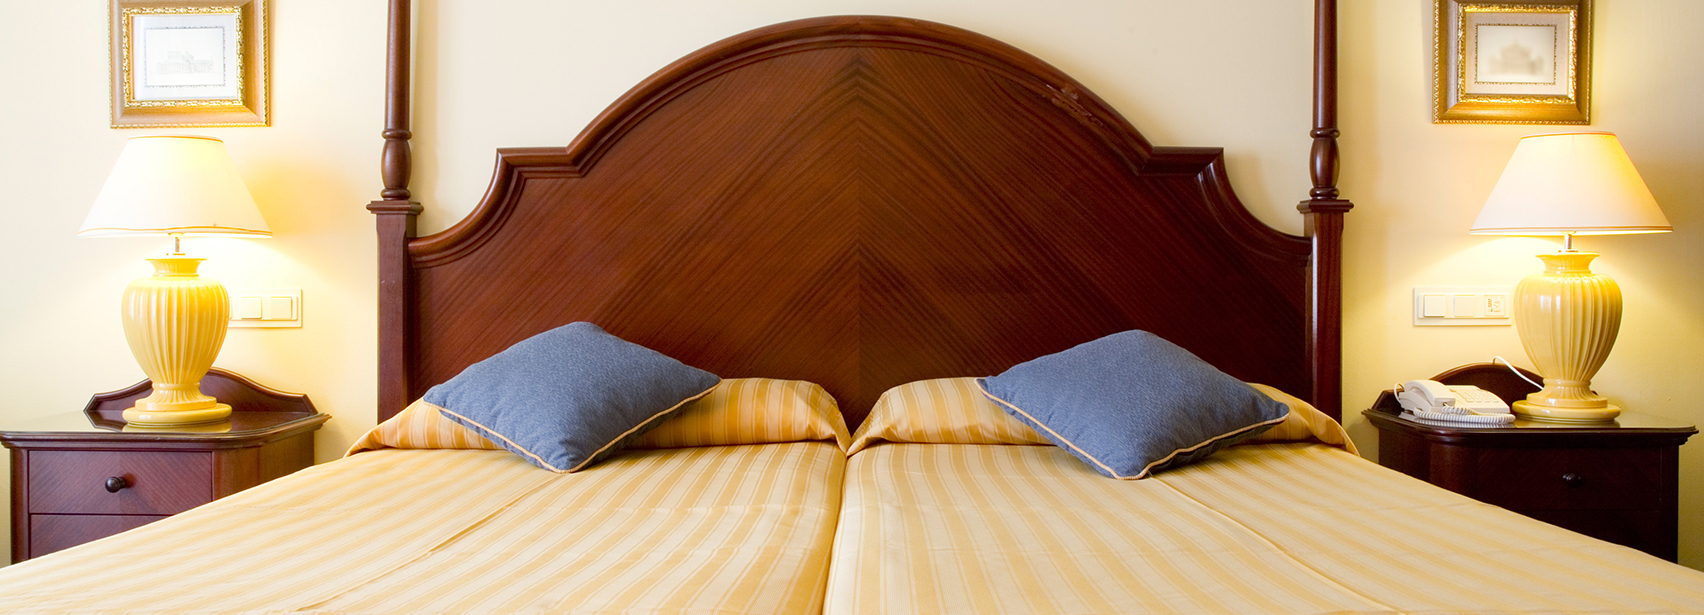 Two Twins Into A King Size Mattress, Combine Twin Beds Into King